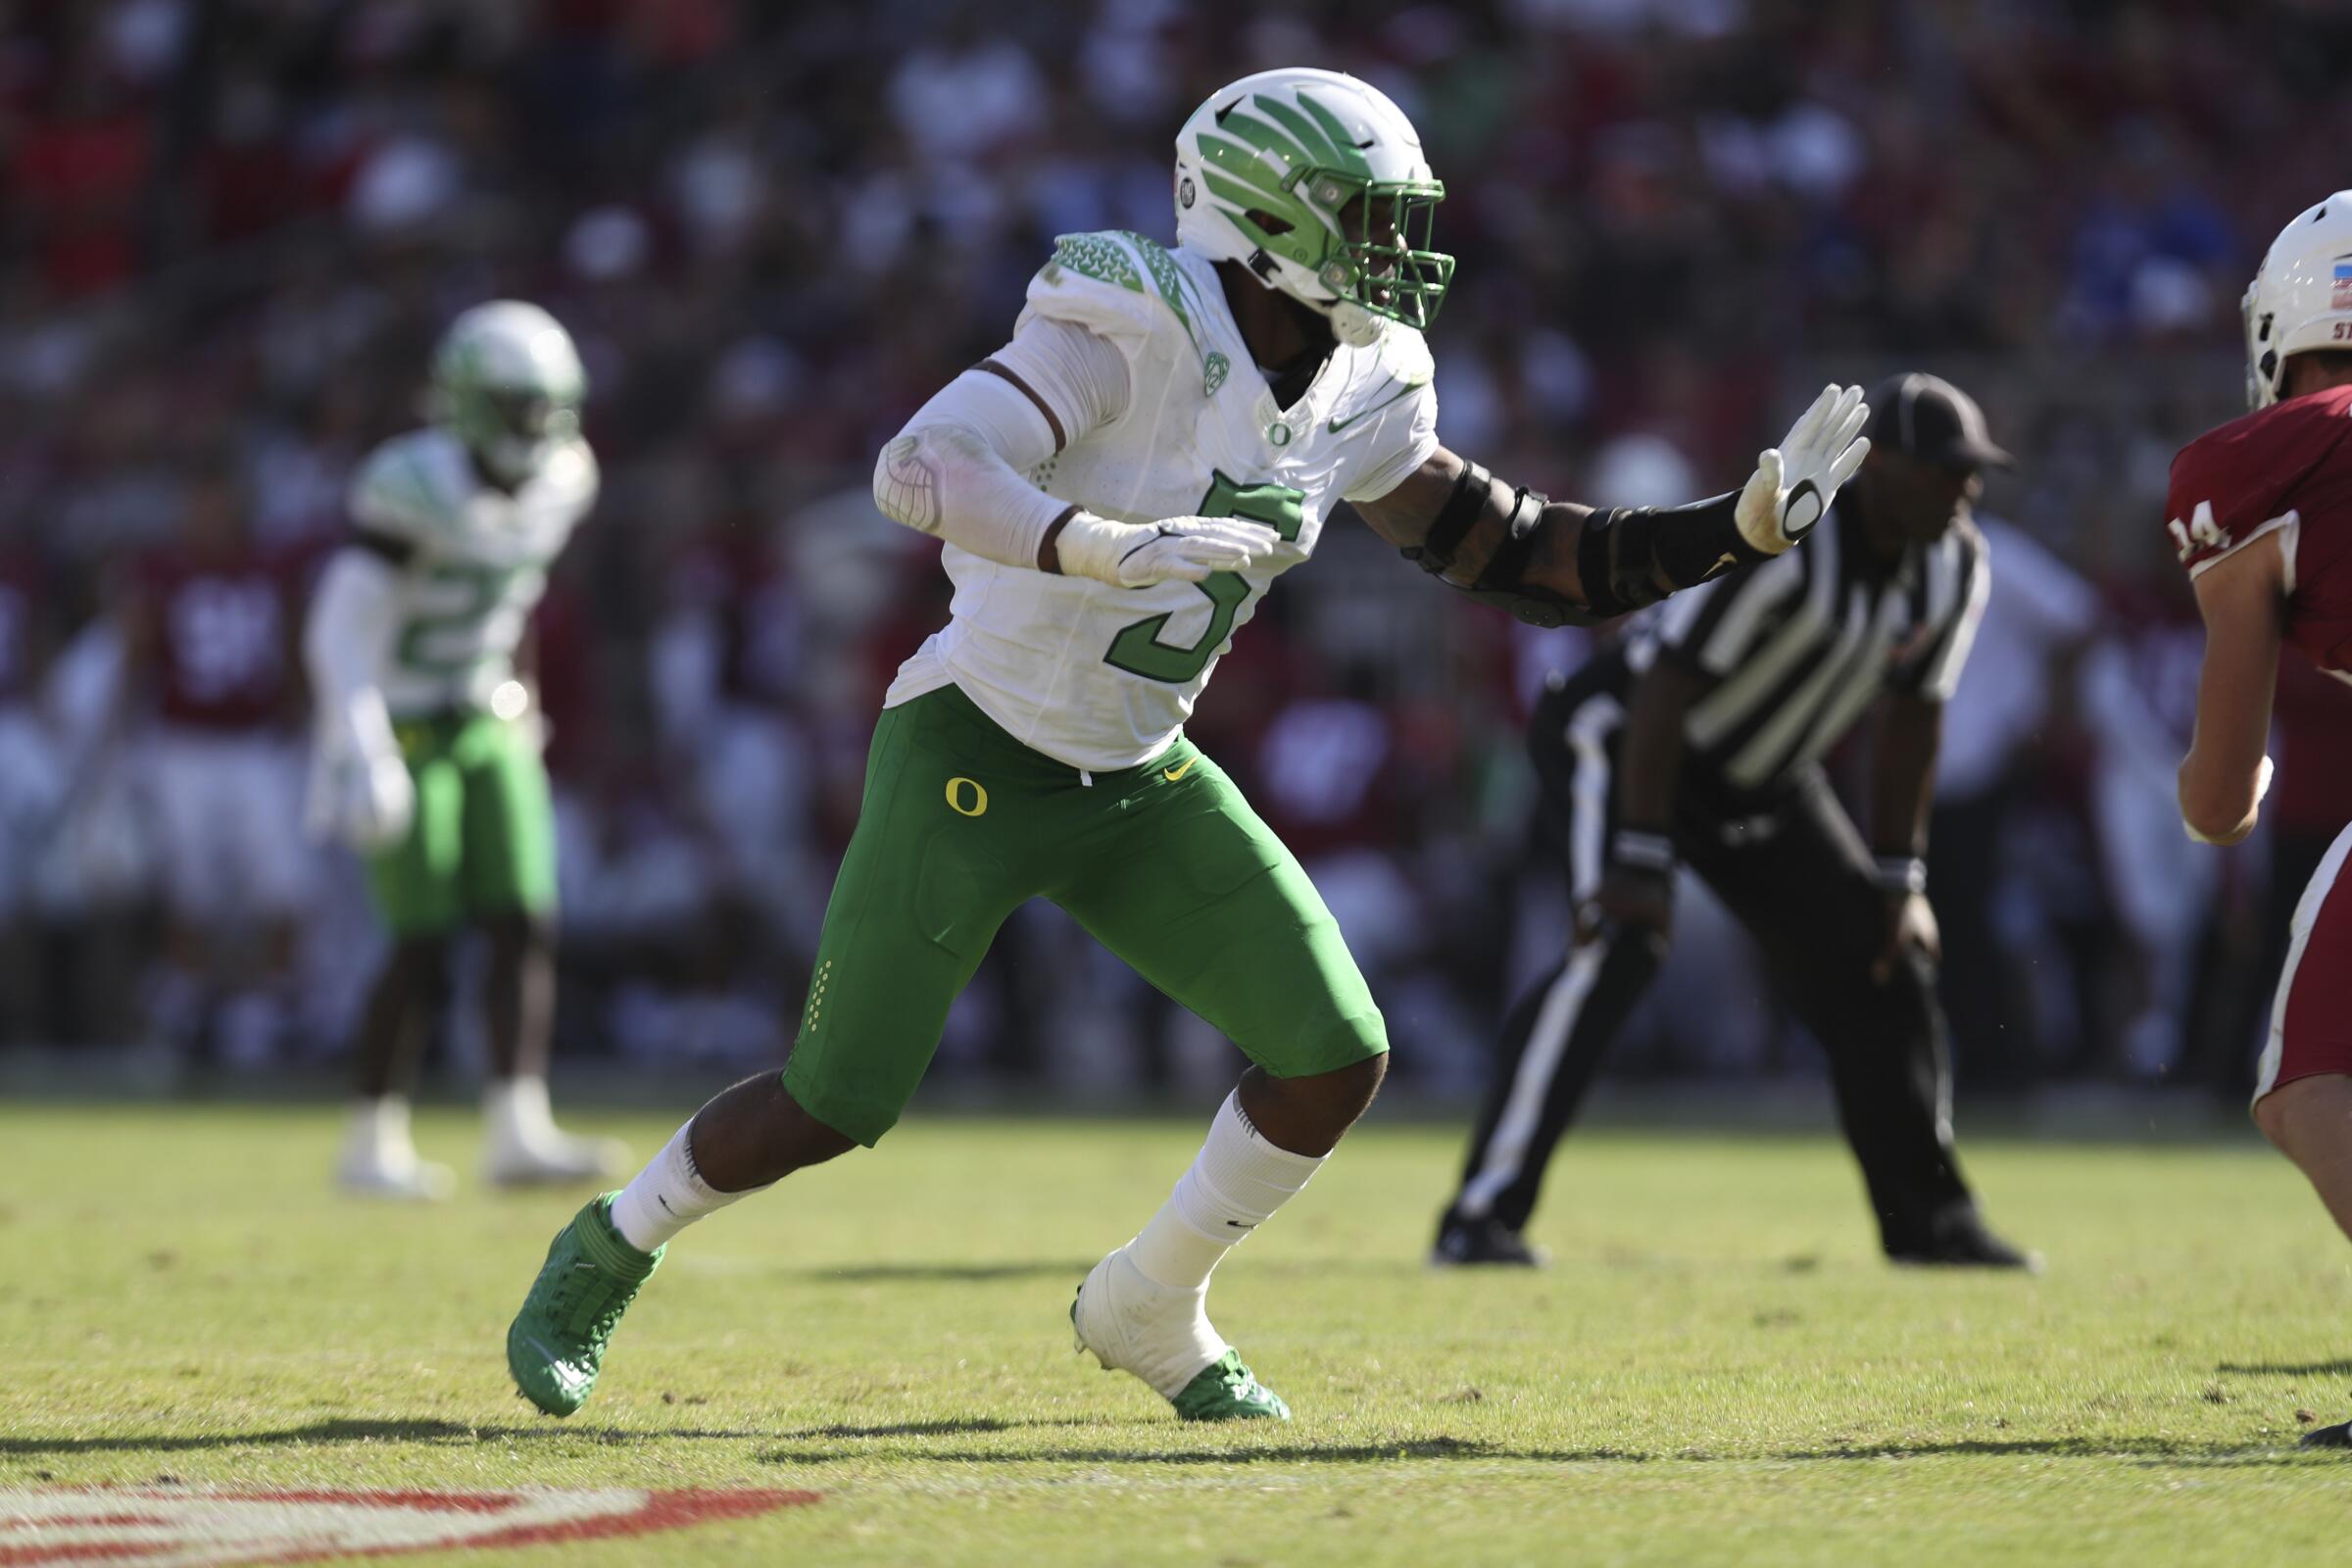 Oregon's Kayvon Thibodeaux follows a play during a loss to Stanford on Oct. 2.